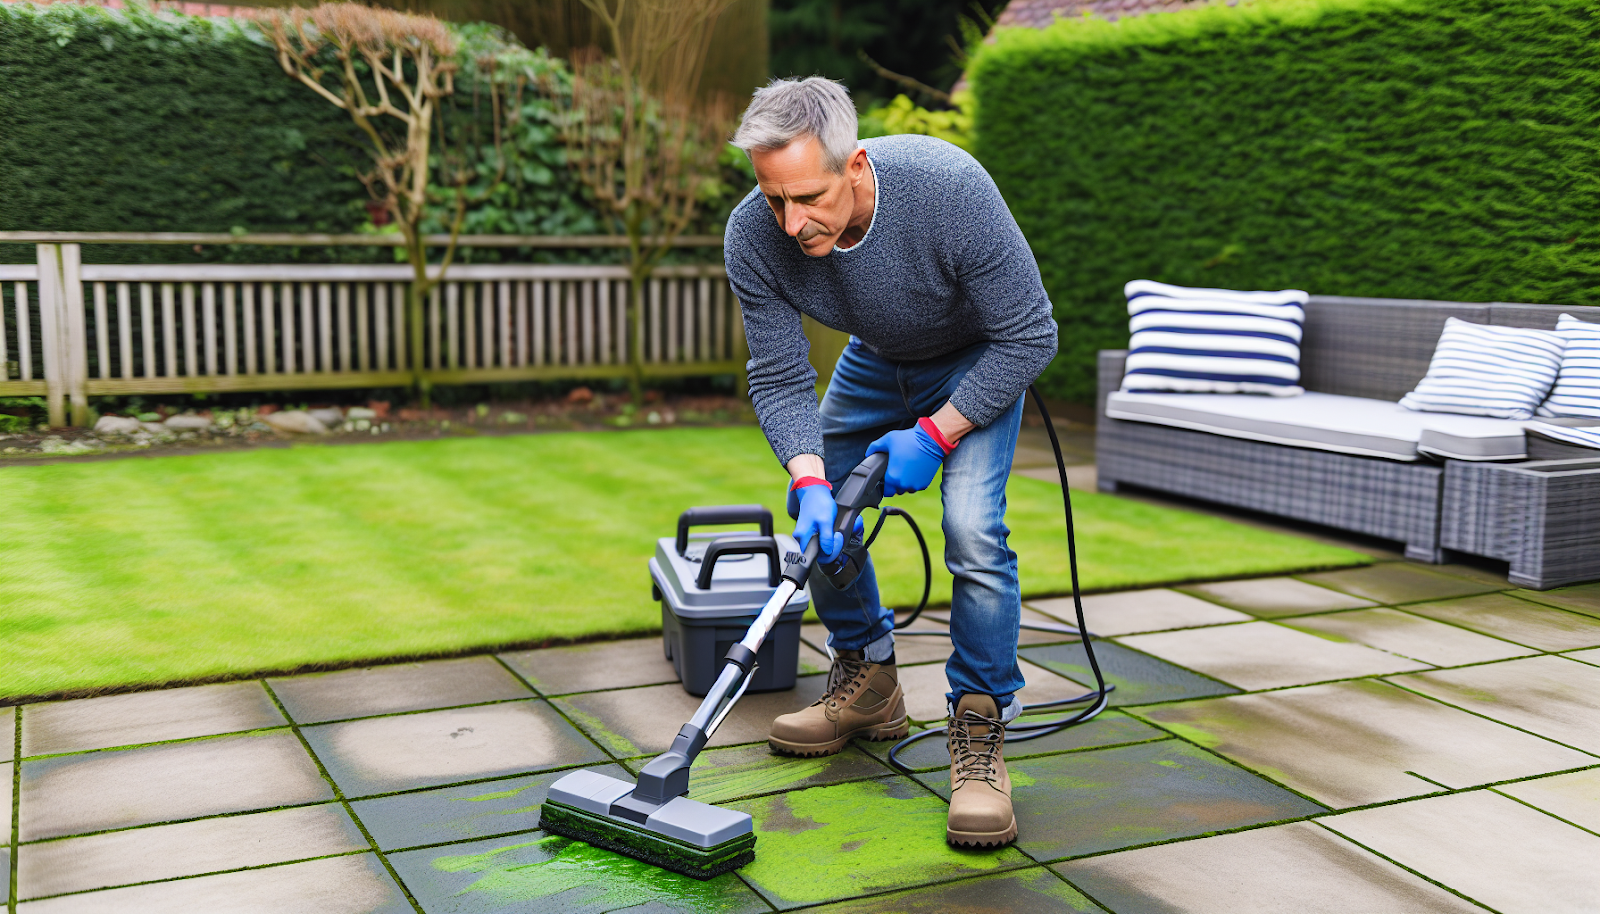 Removing green algae and moss from patio slabs